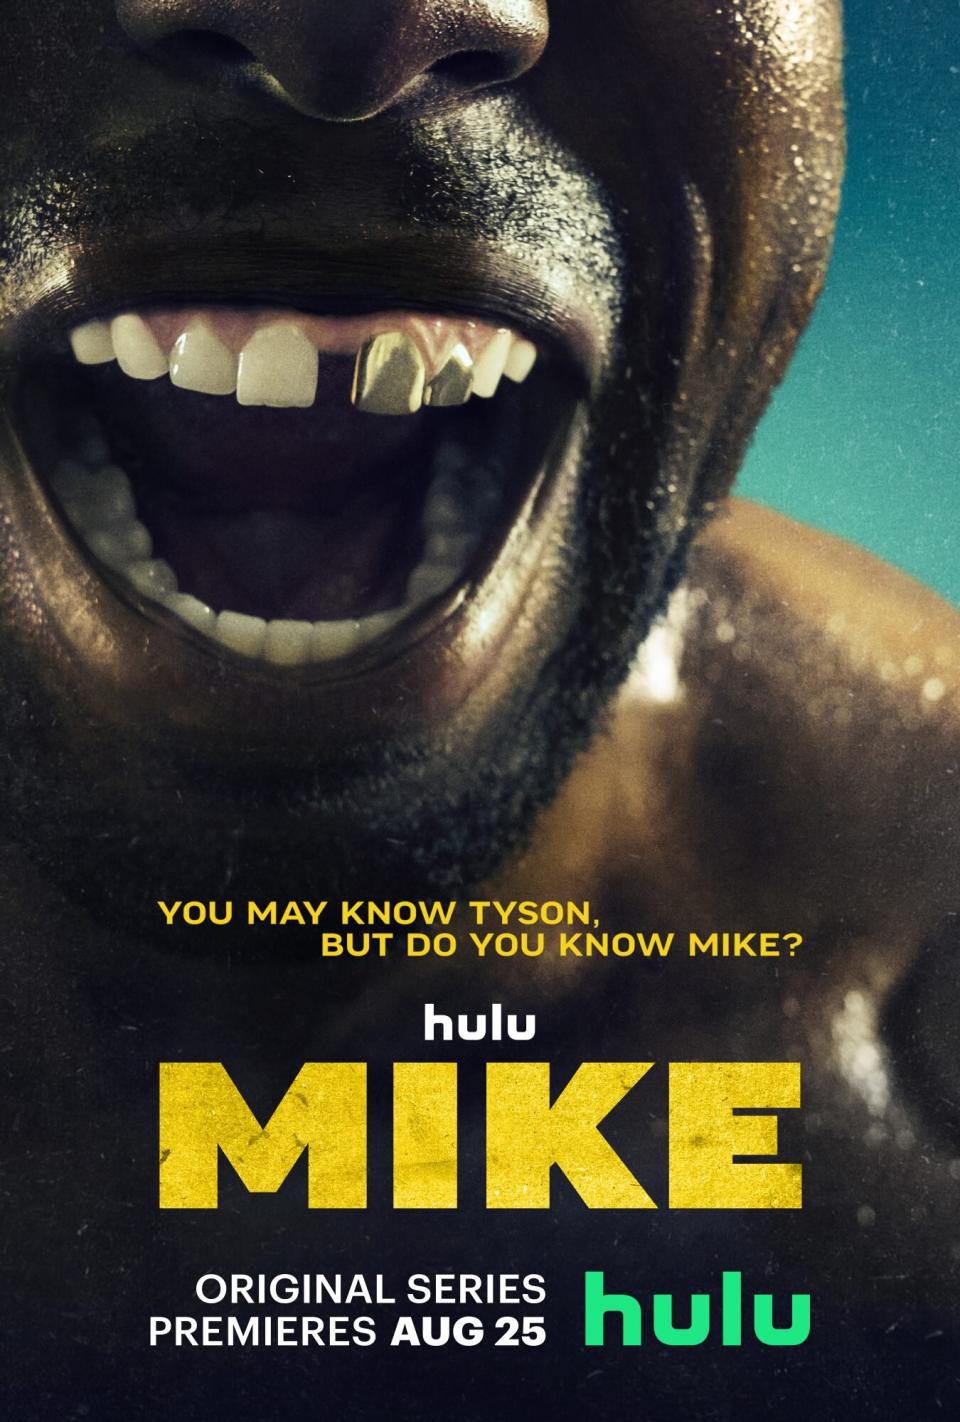 Hulu Release First Official Trailer for Mike Tyson Series Starring Trevante Rhodes